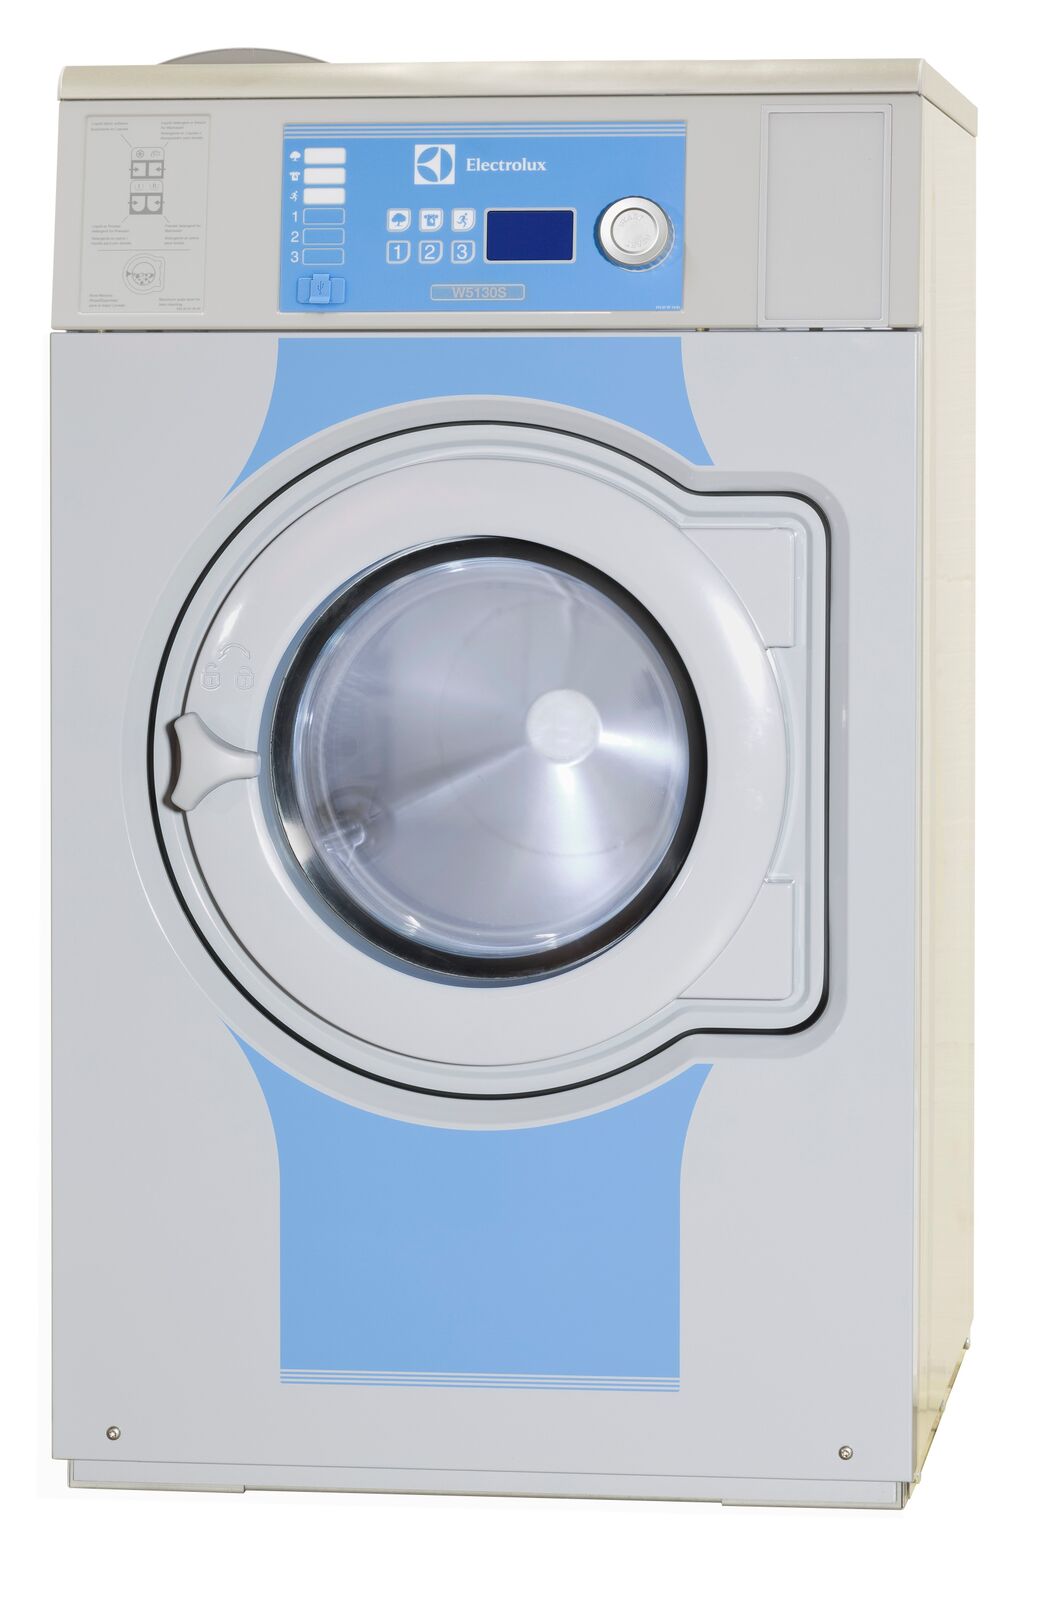 New 2020 Electrolux W5330N - Cardinal Laundry Equipment Co